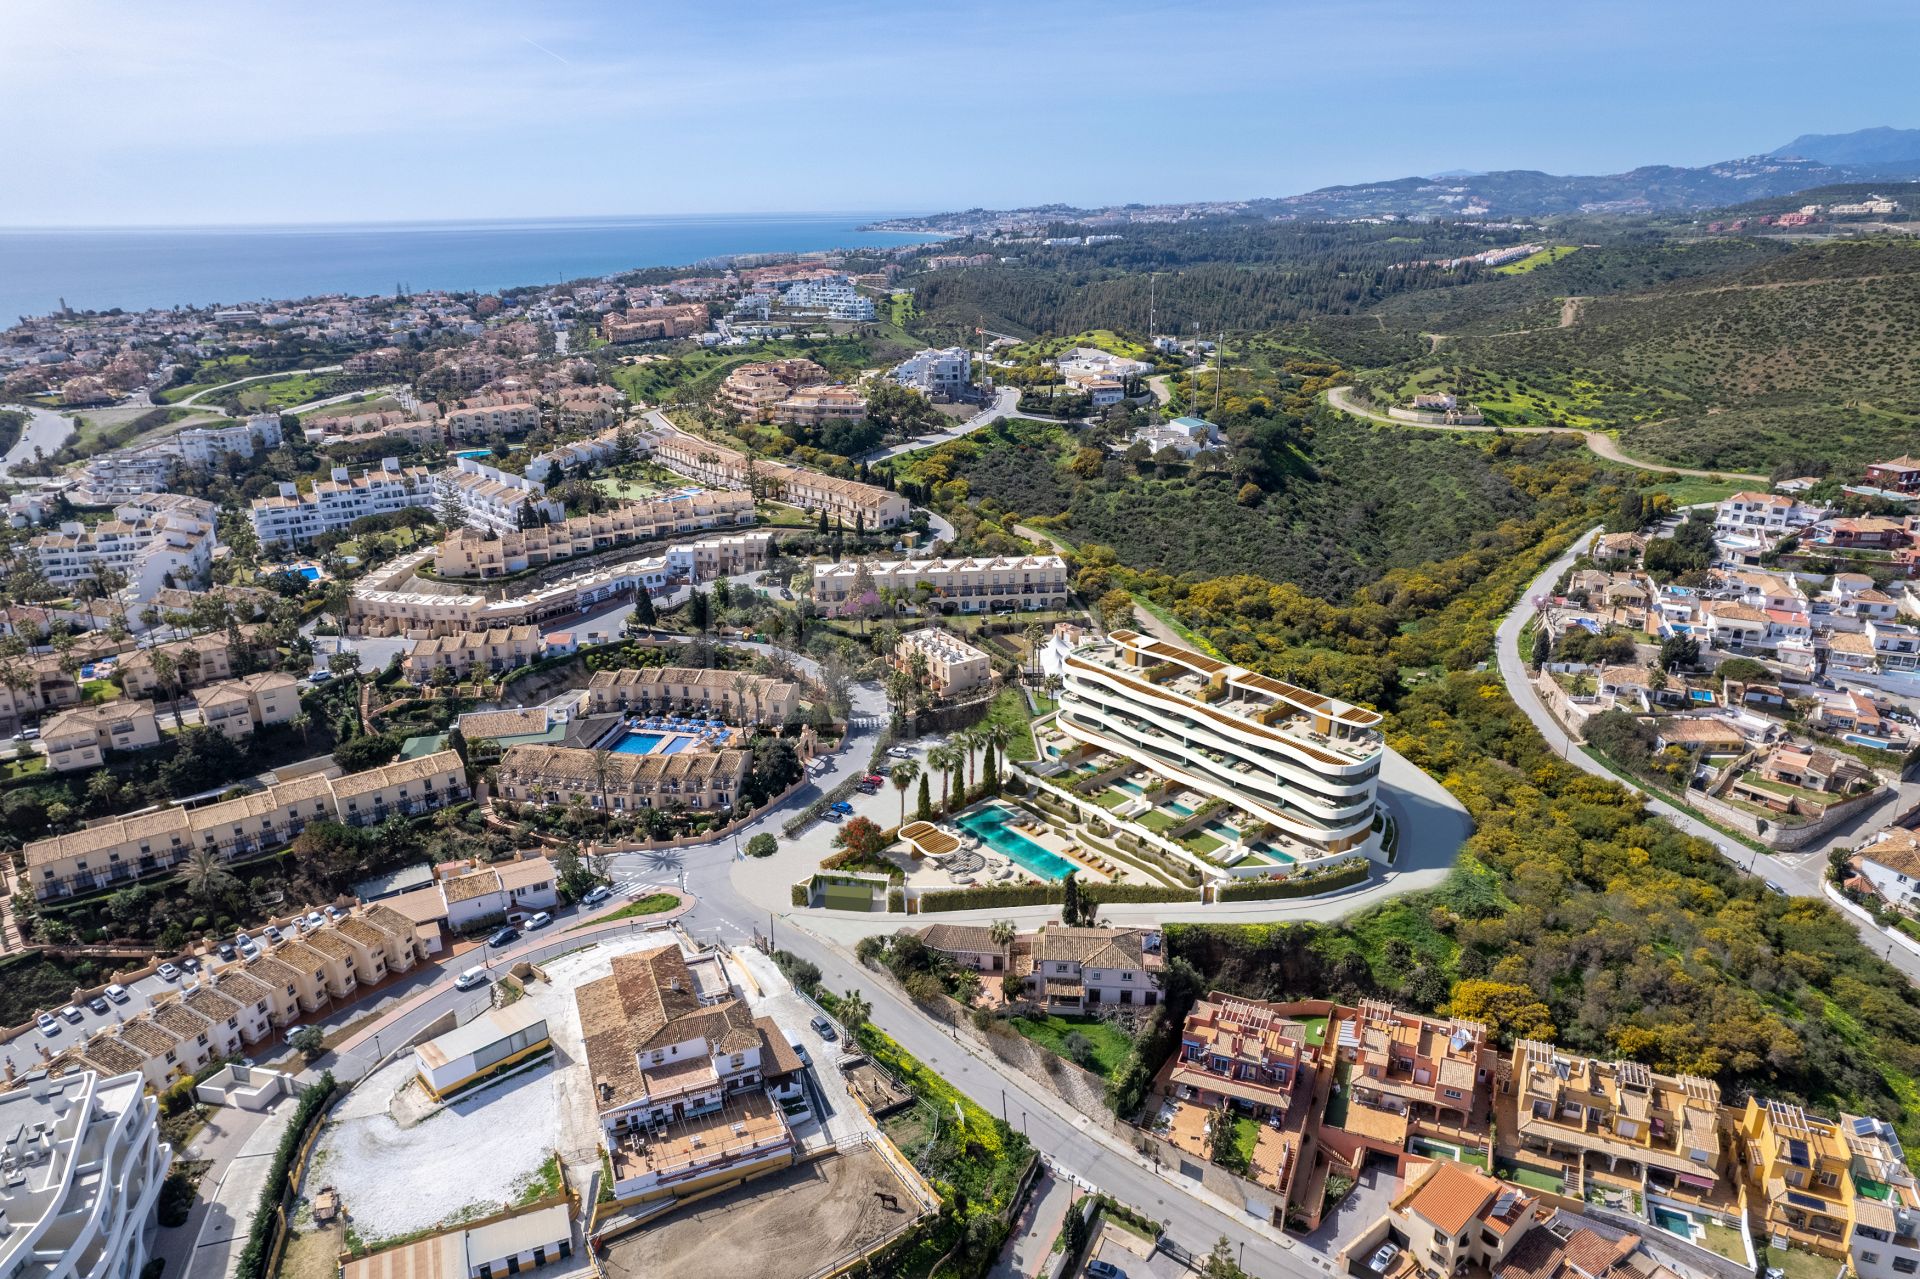 STRIKING BRAND NEW 2- BEDROOM CONTEMPORARY APARTMENT FOR SALE IN MIJAS COSTA